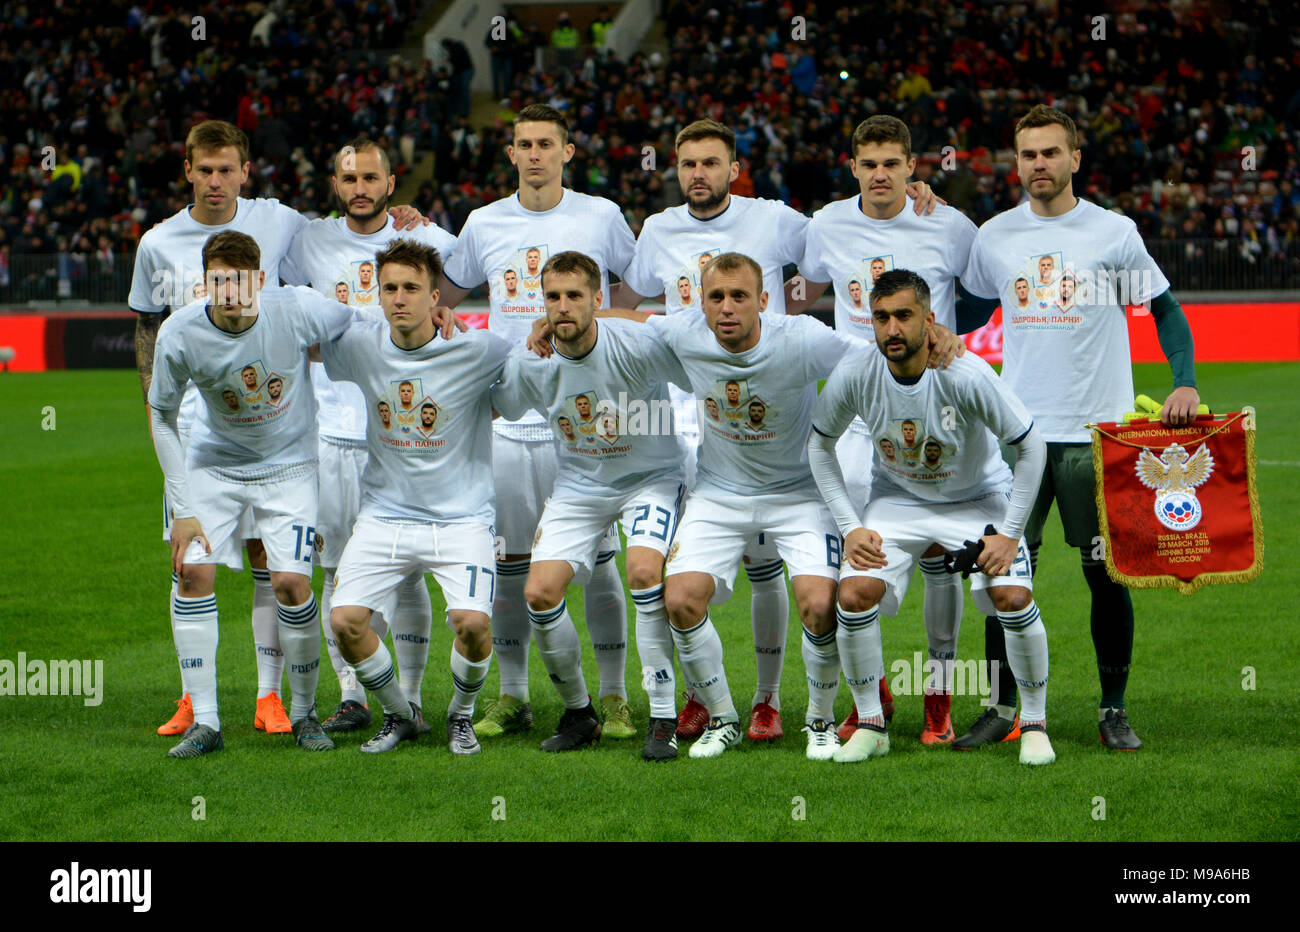 Moscow, Russia - March 23, 2018. National team of Russia before international friendly match against Brazil at Luzhniki stadium in Moscow. Credit: Alizada Studios/Alamy Live News Stock Photo